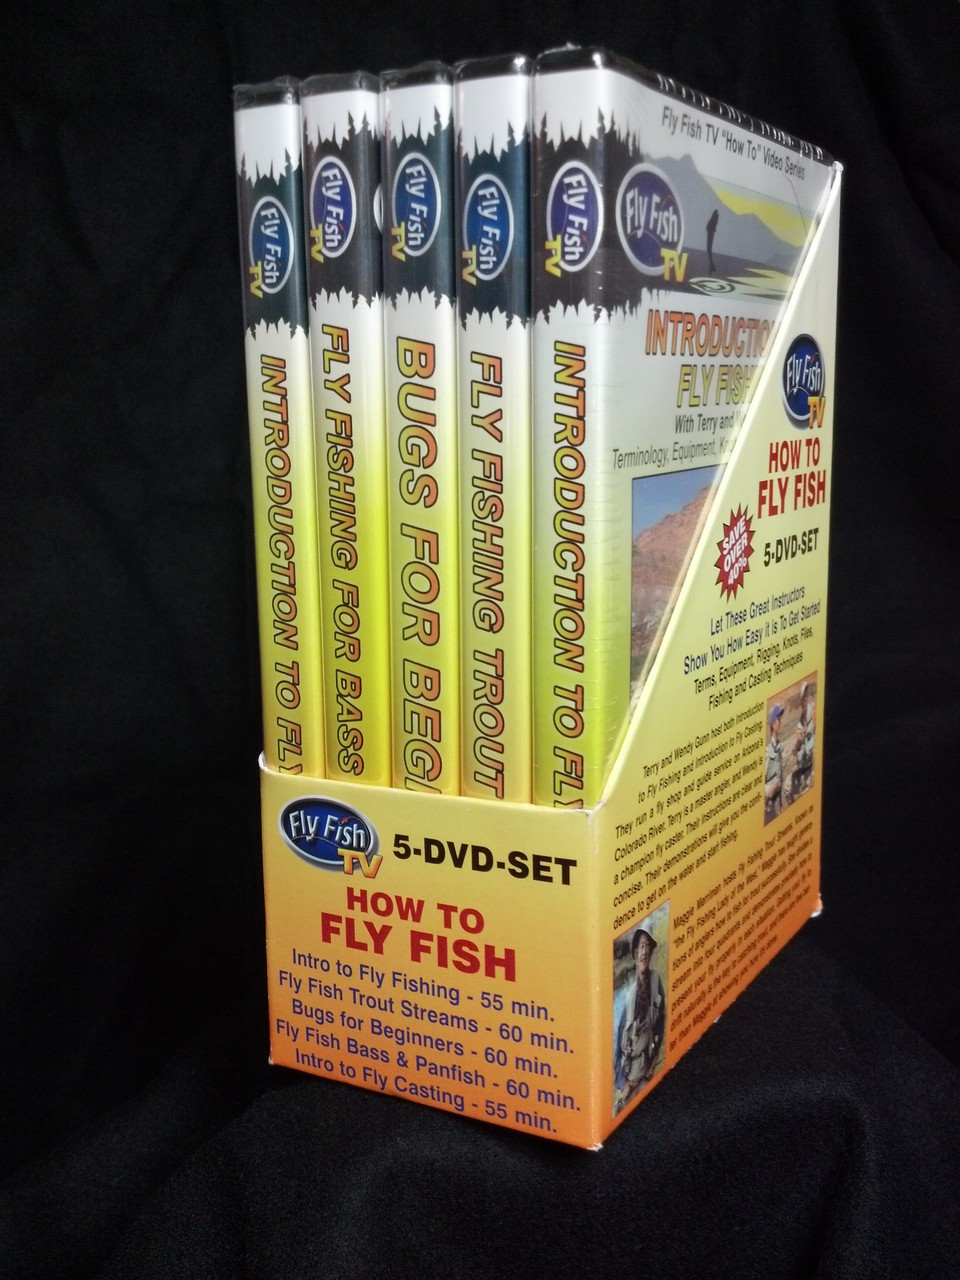 Fly Fishing Beginner Video 5 DVD Gift Set - Learn How to Fly Fish